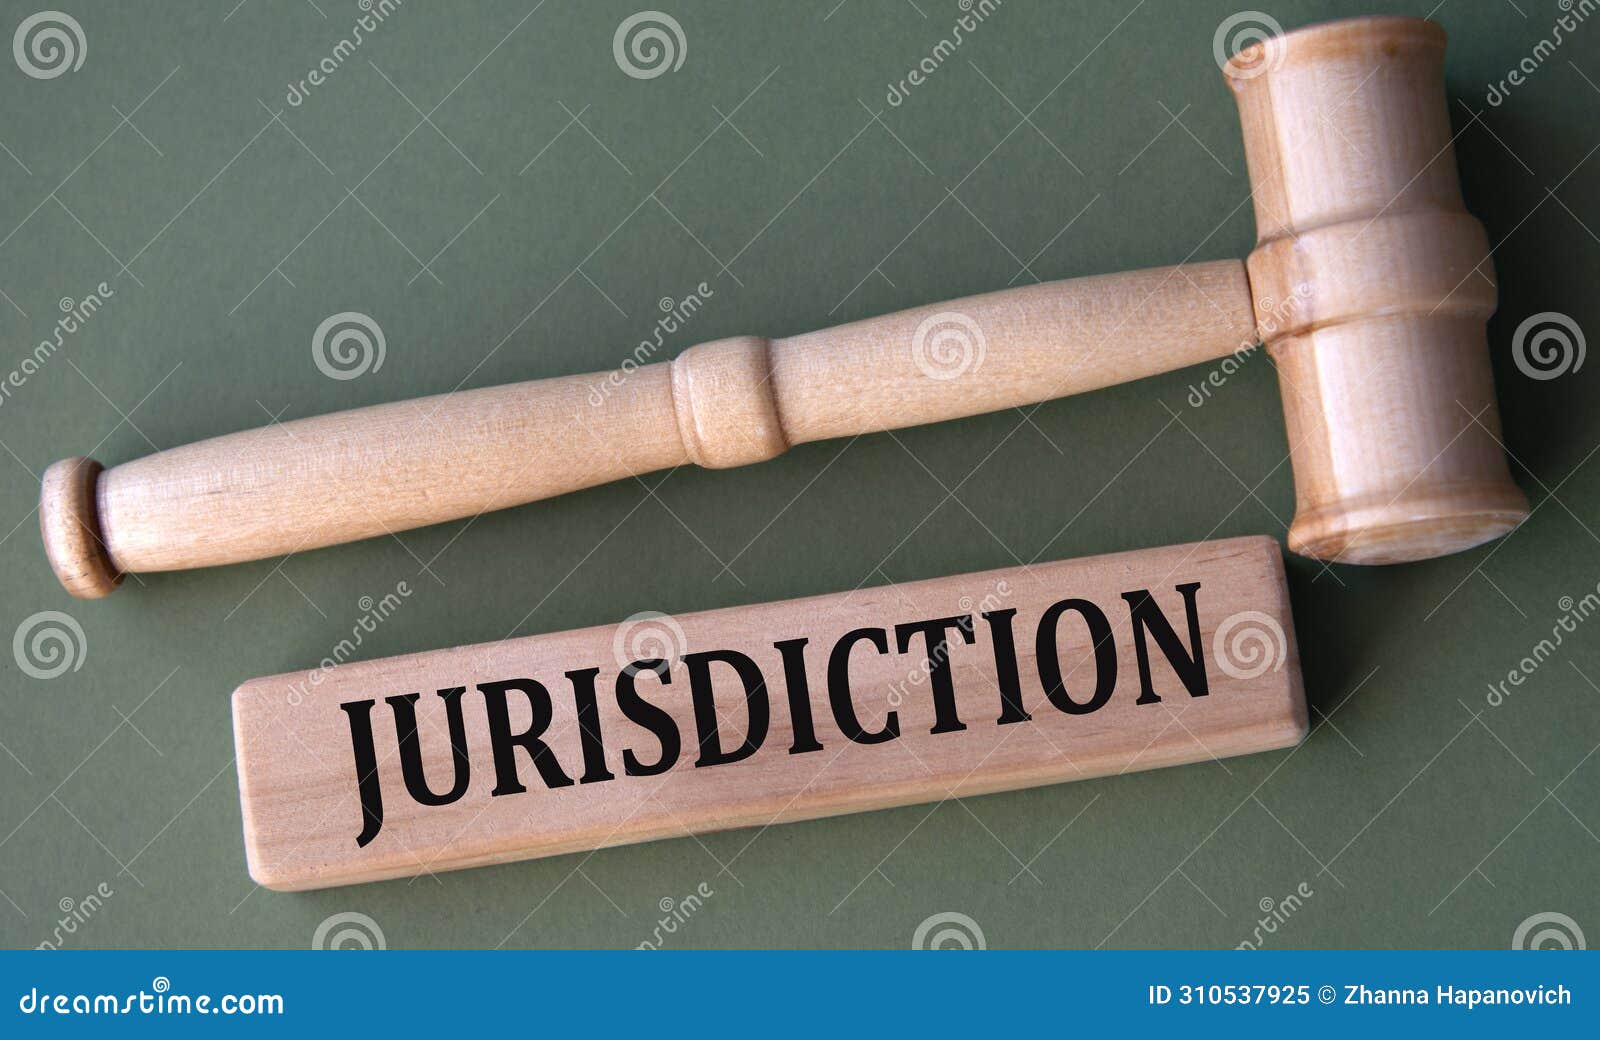 jurisdiction - word on wooden blocks on a white background with a judge's gavel